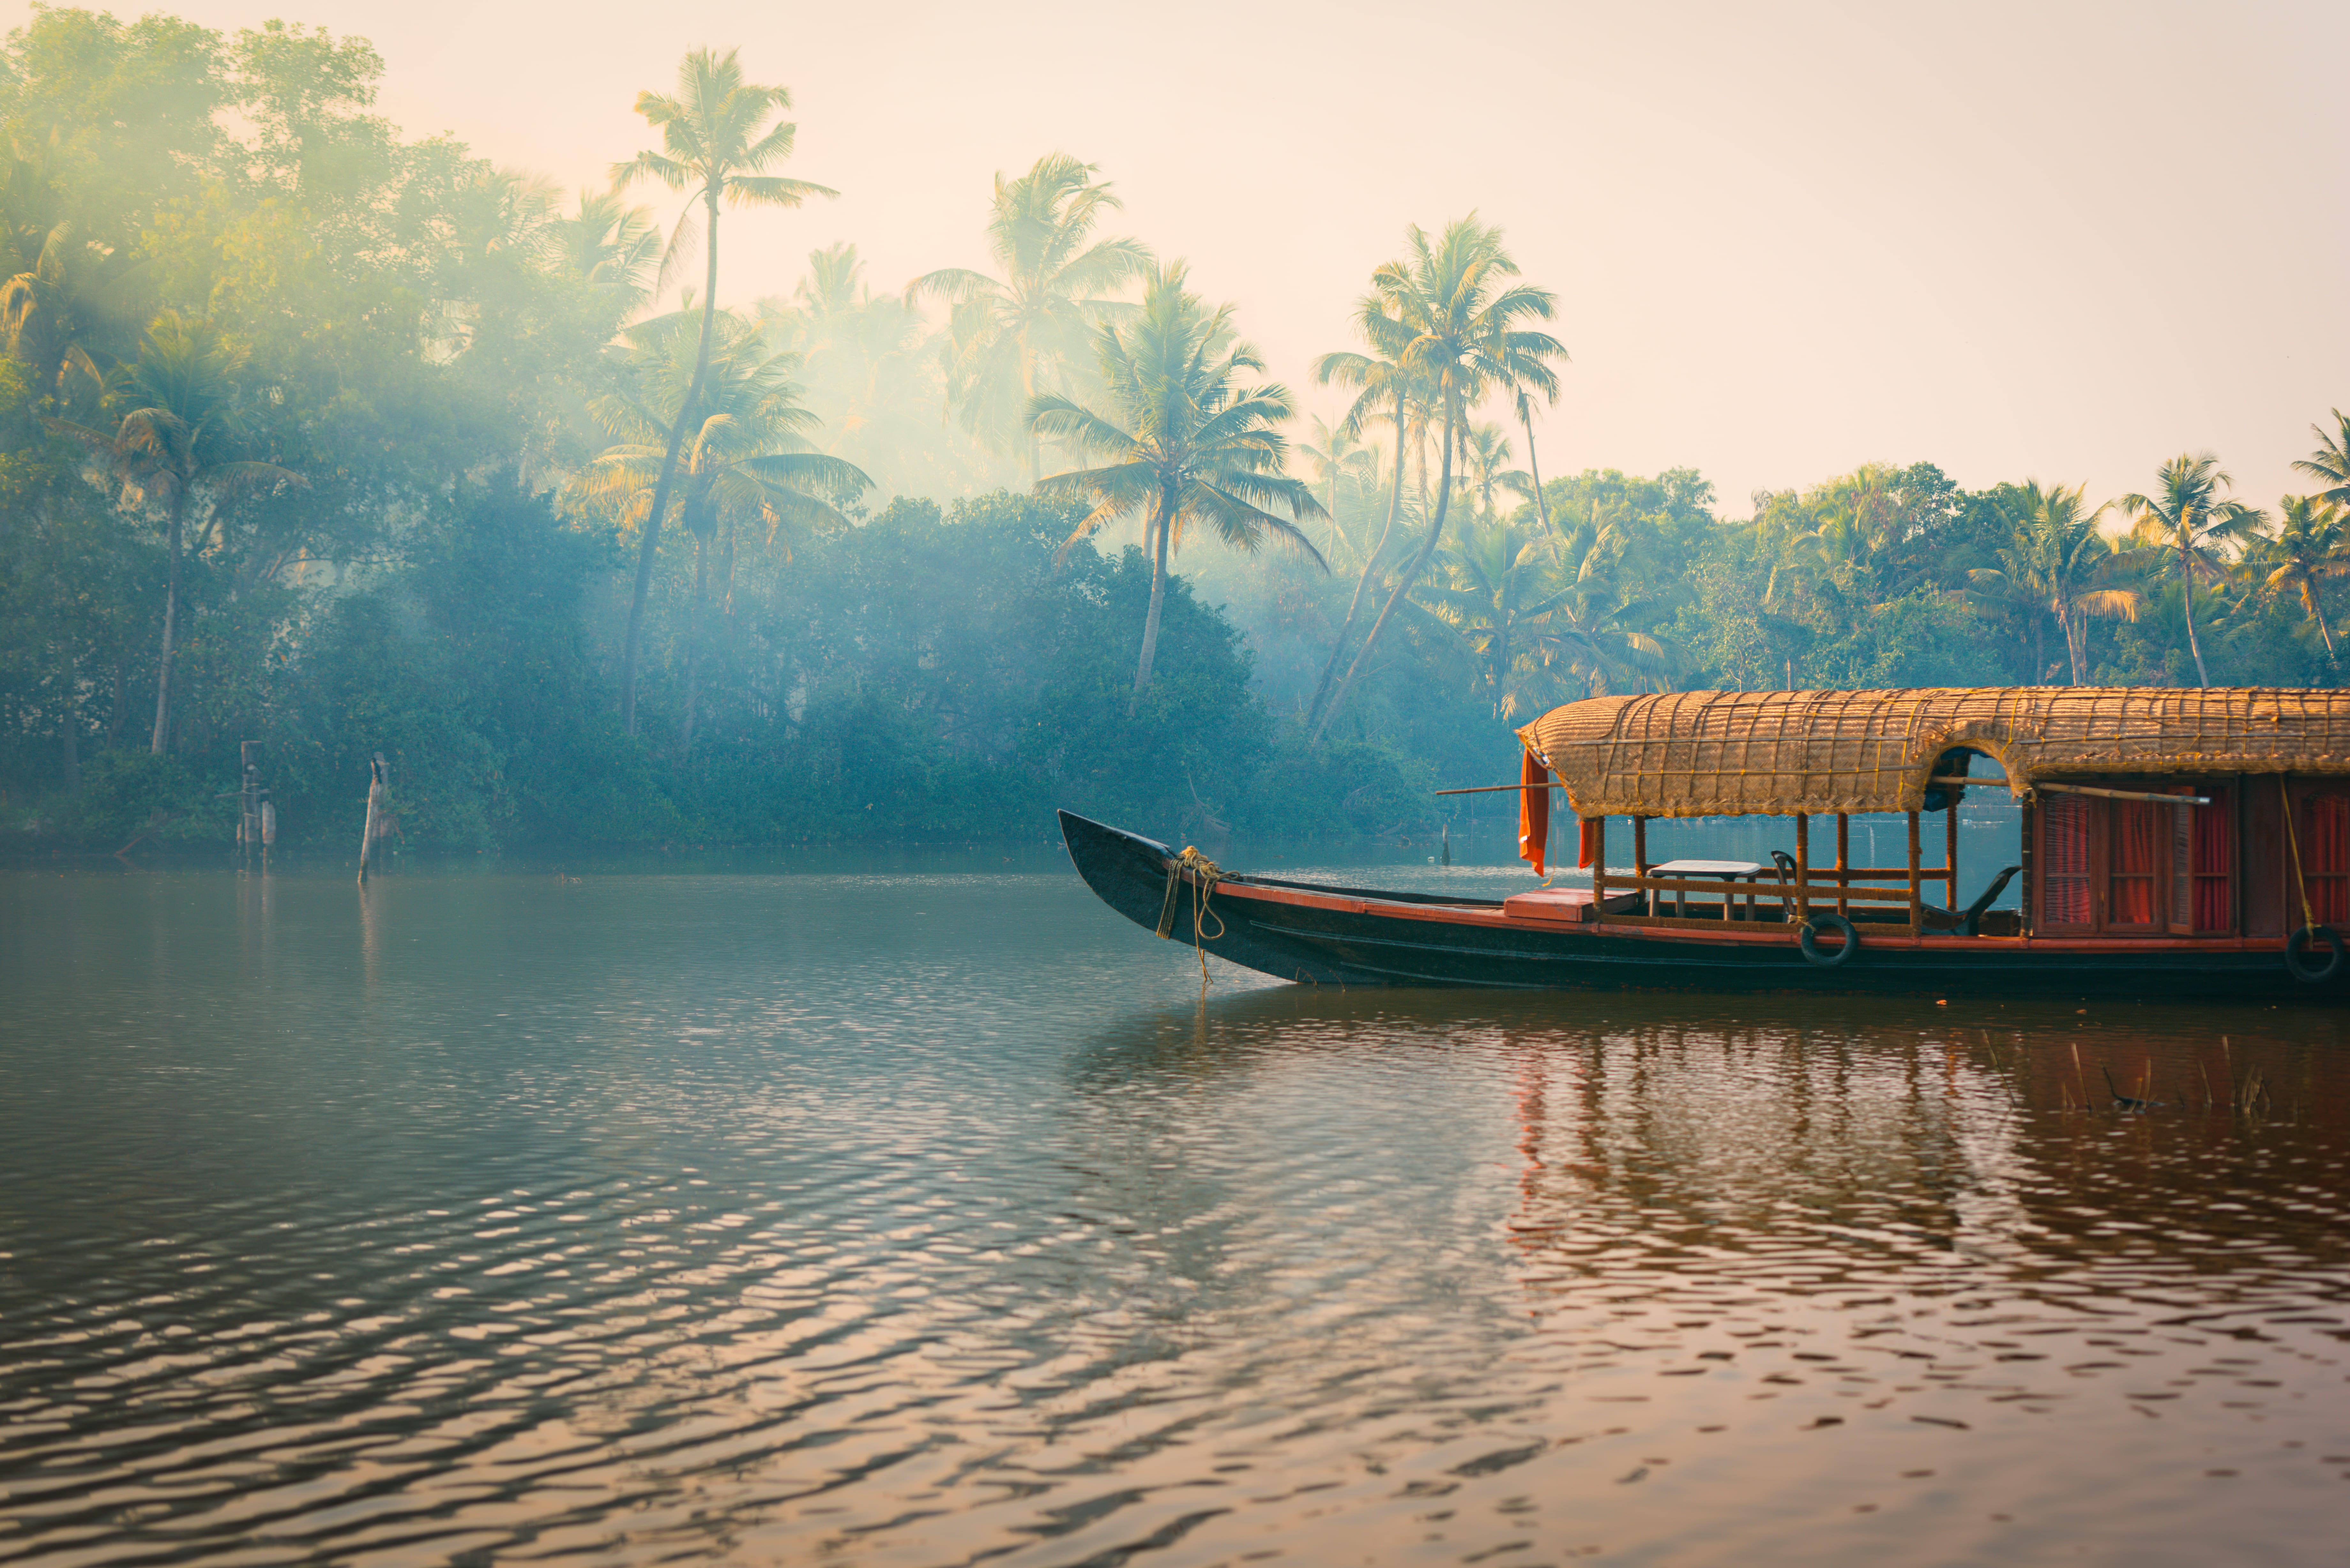 Houseboat in the backwaters of Alleppey